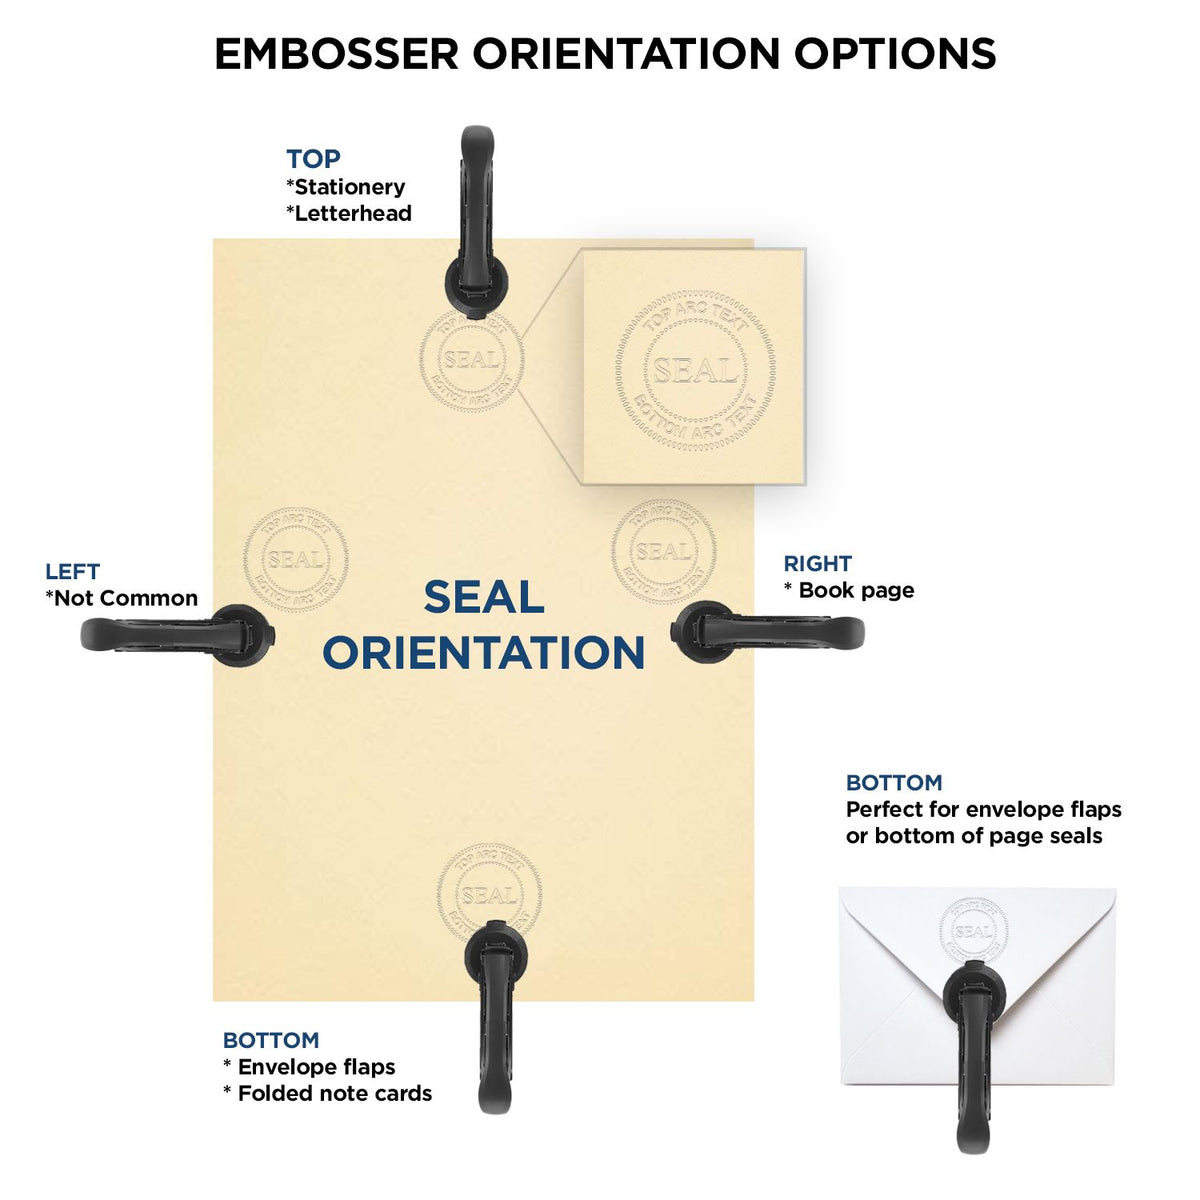 An infographic for the Wisconsin Geologist Desk Seal showing embosser orientation, this is showing examples of a top, bottom, right and left insert.